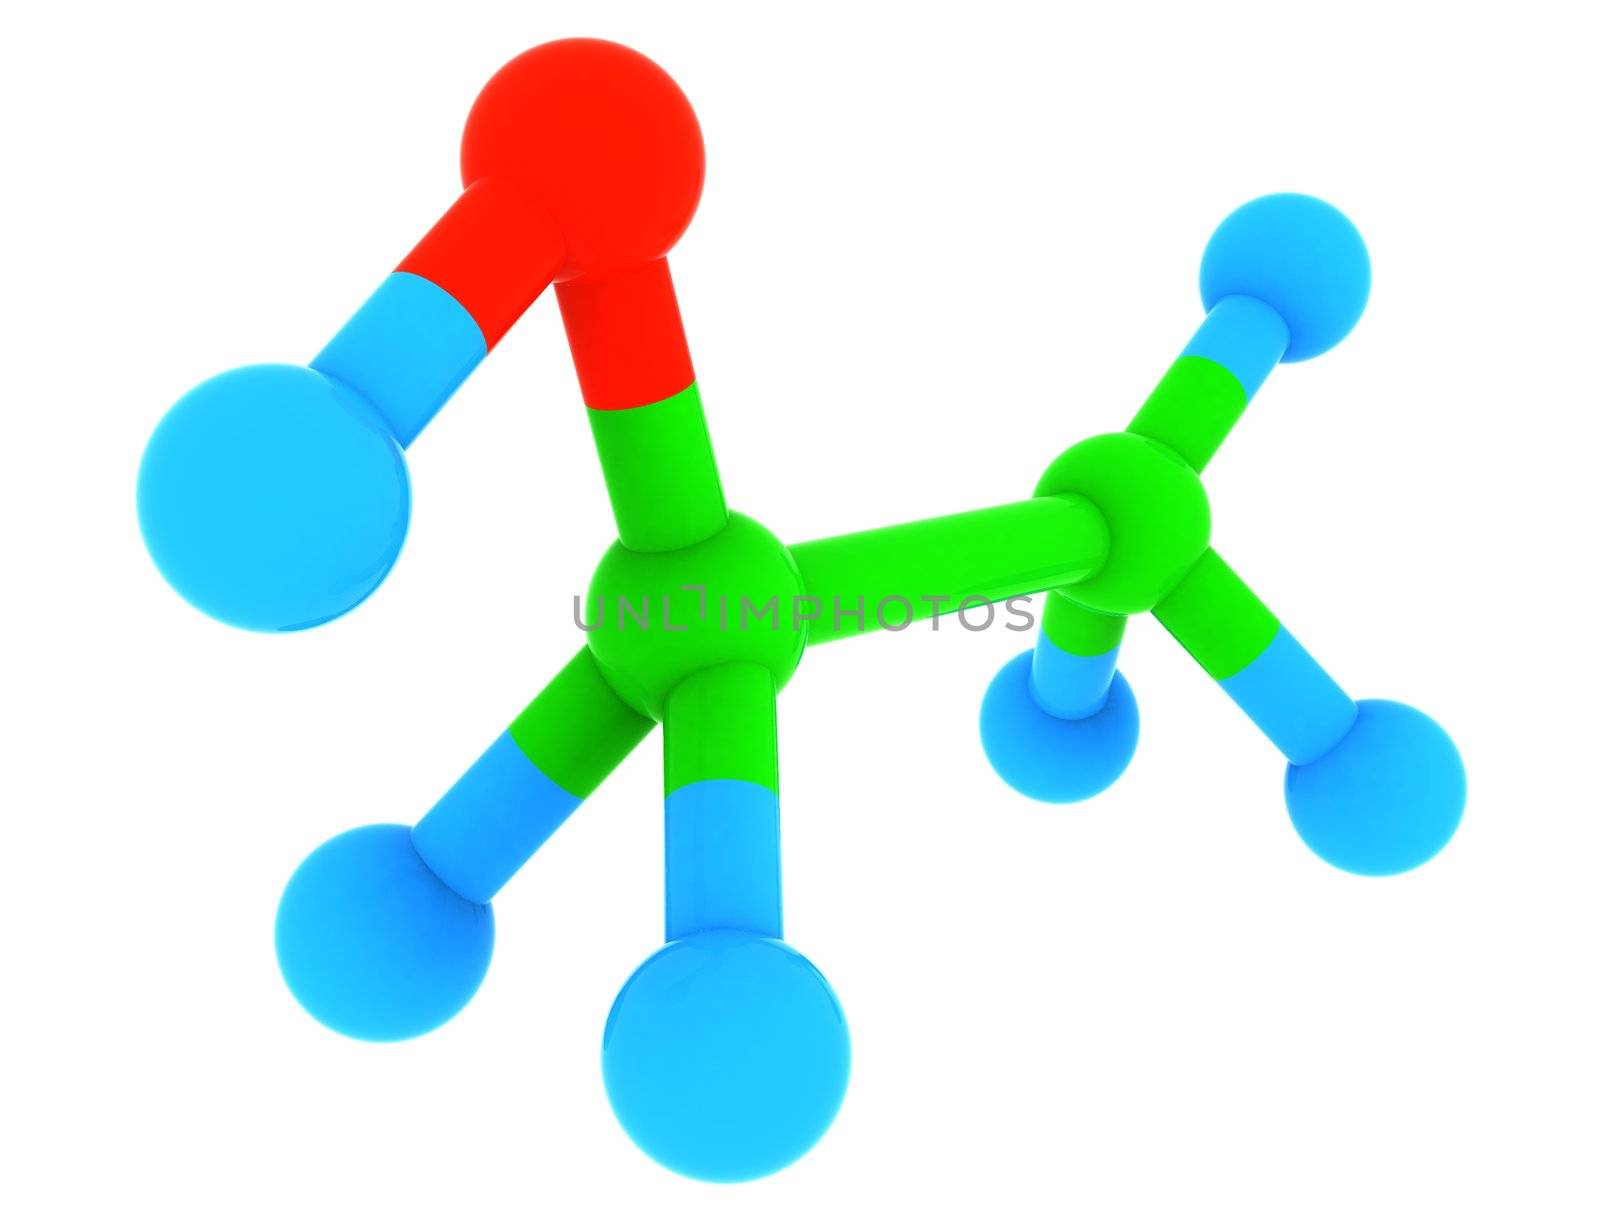 Isolated 3d model of ethanol [alcohol] - C2H6O molecule
